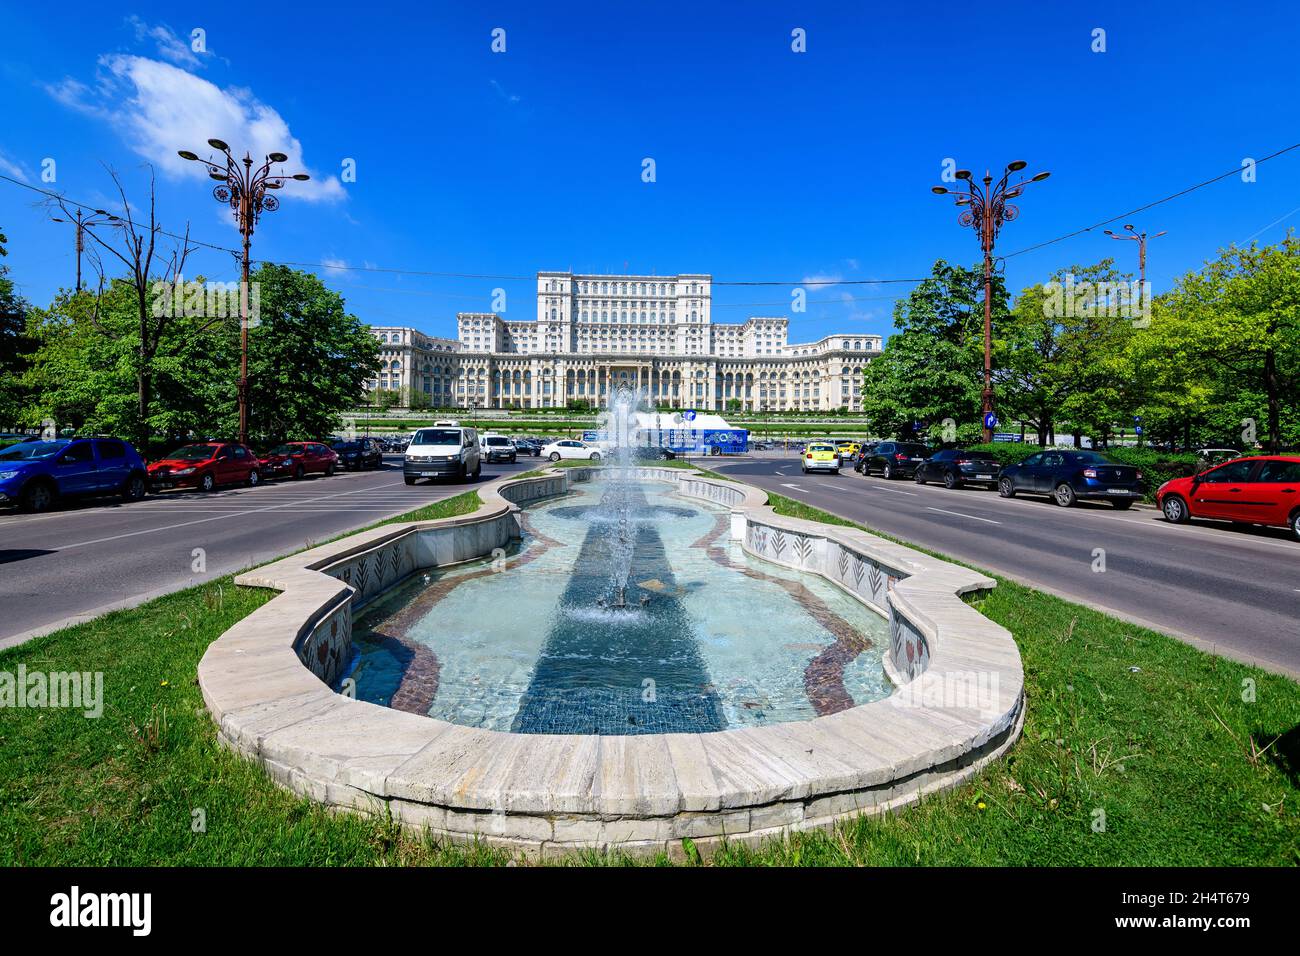 Bucharest, Romania, 6 May 2021: The Palace of the Parliament also known as People's House (Casa Popoprului) in Constitutiei Square (Piata Constitutiei Stock Photo